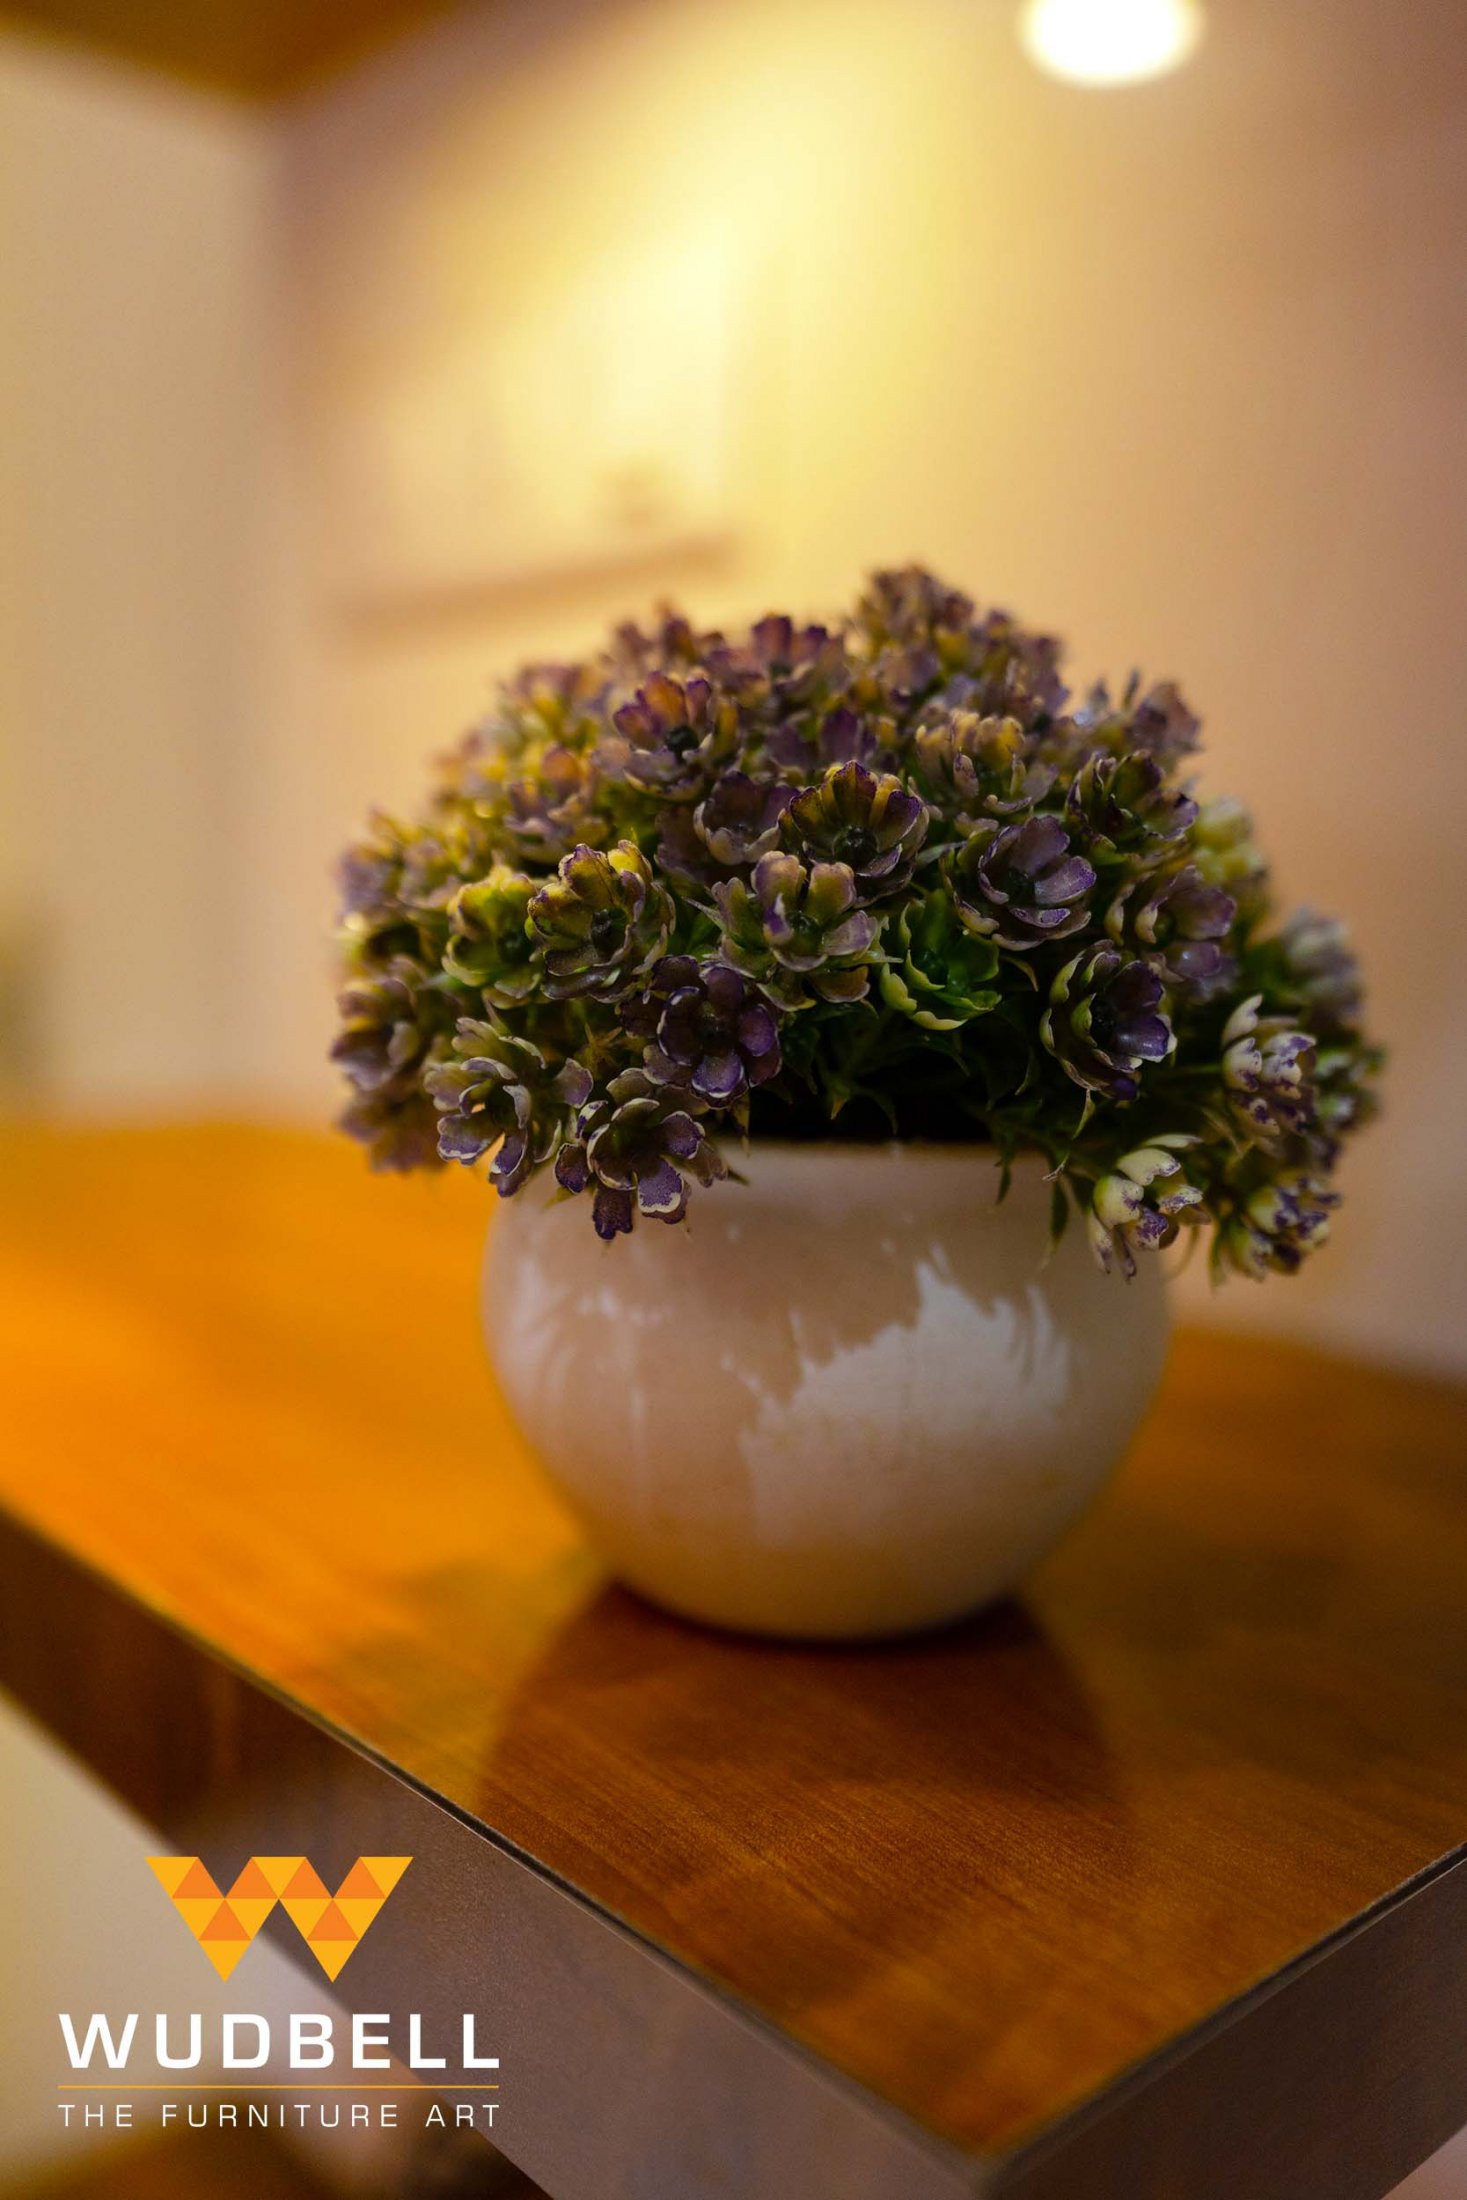 A chic miniature pot with indoor plant